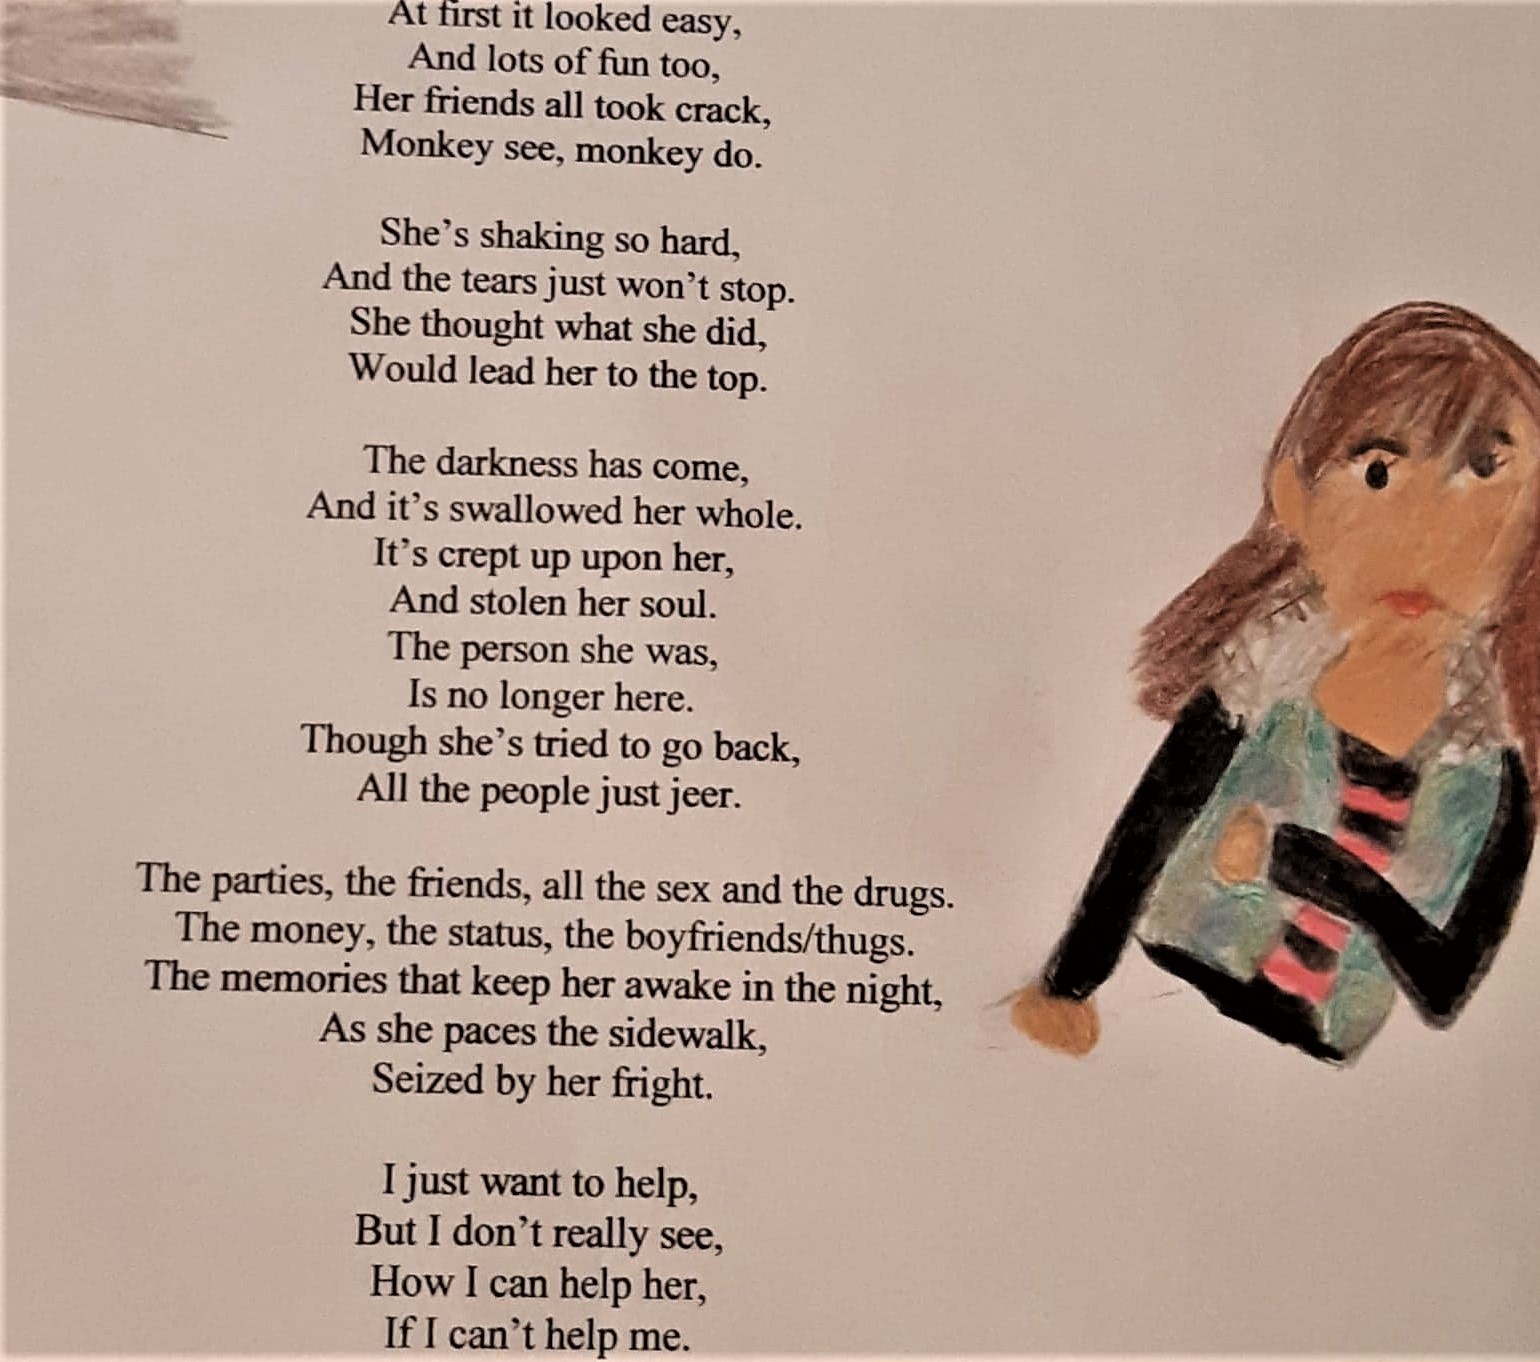 Photo of a poem about drug abuse with illustrations on the side.